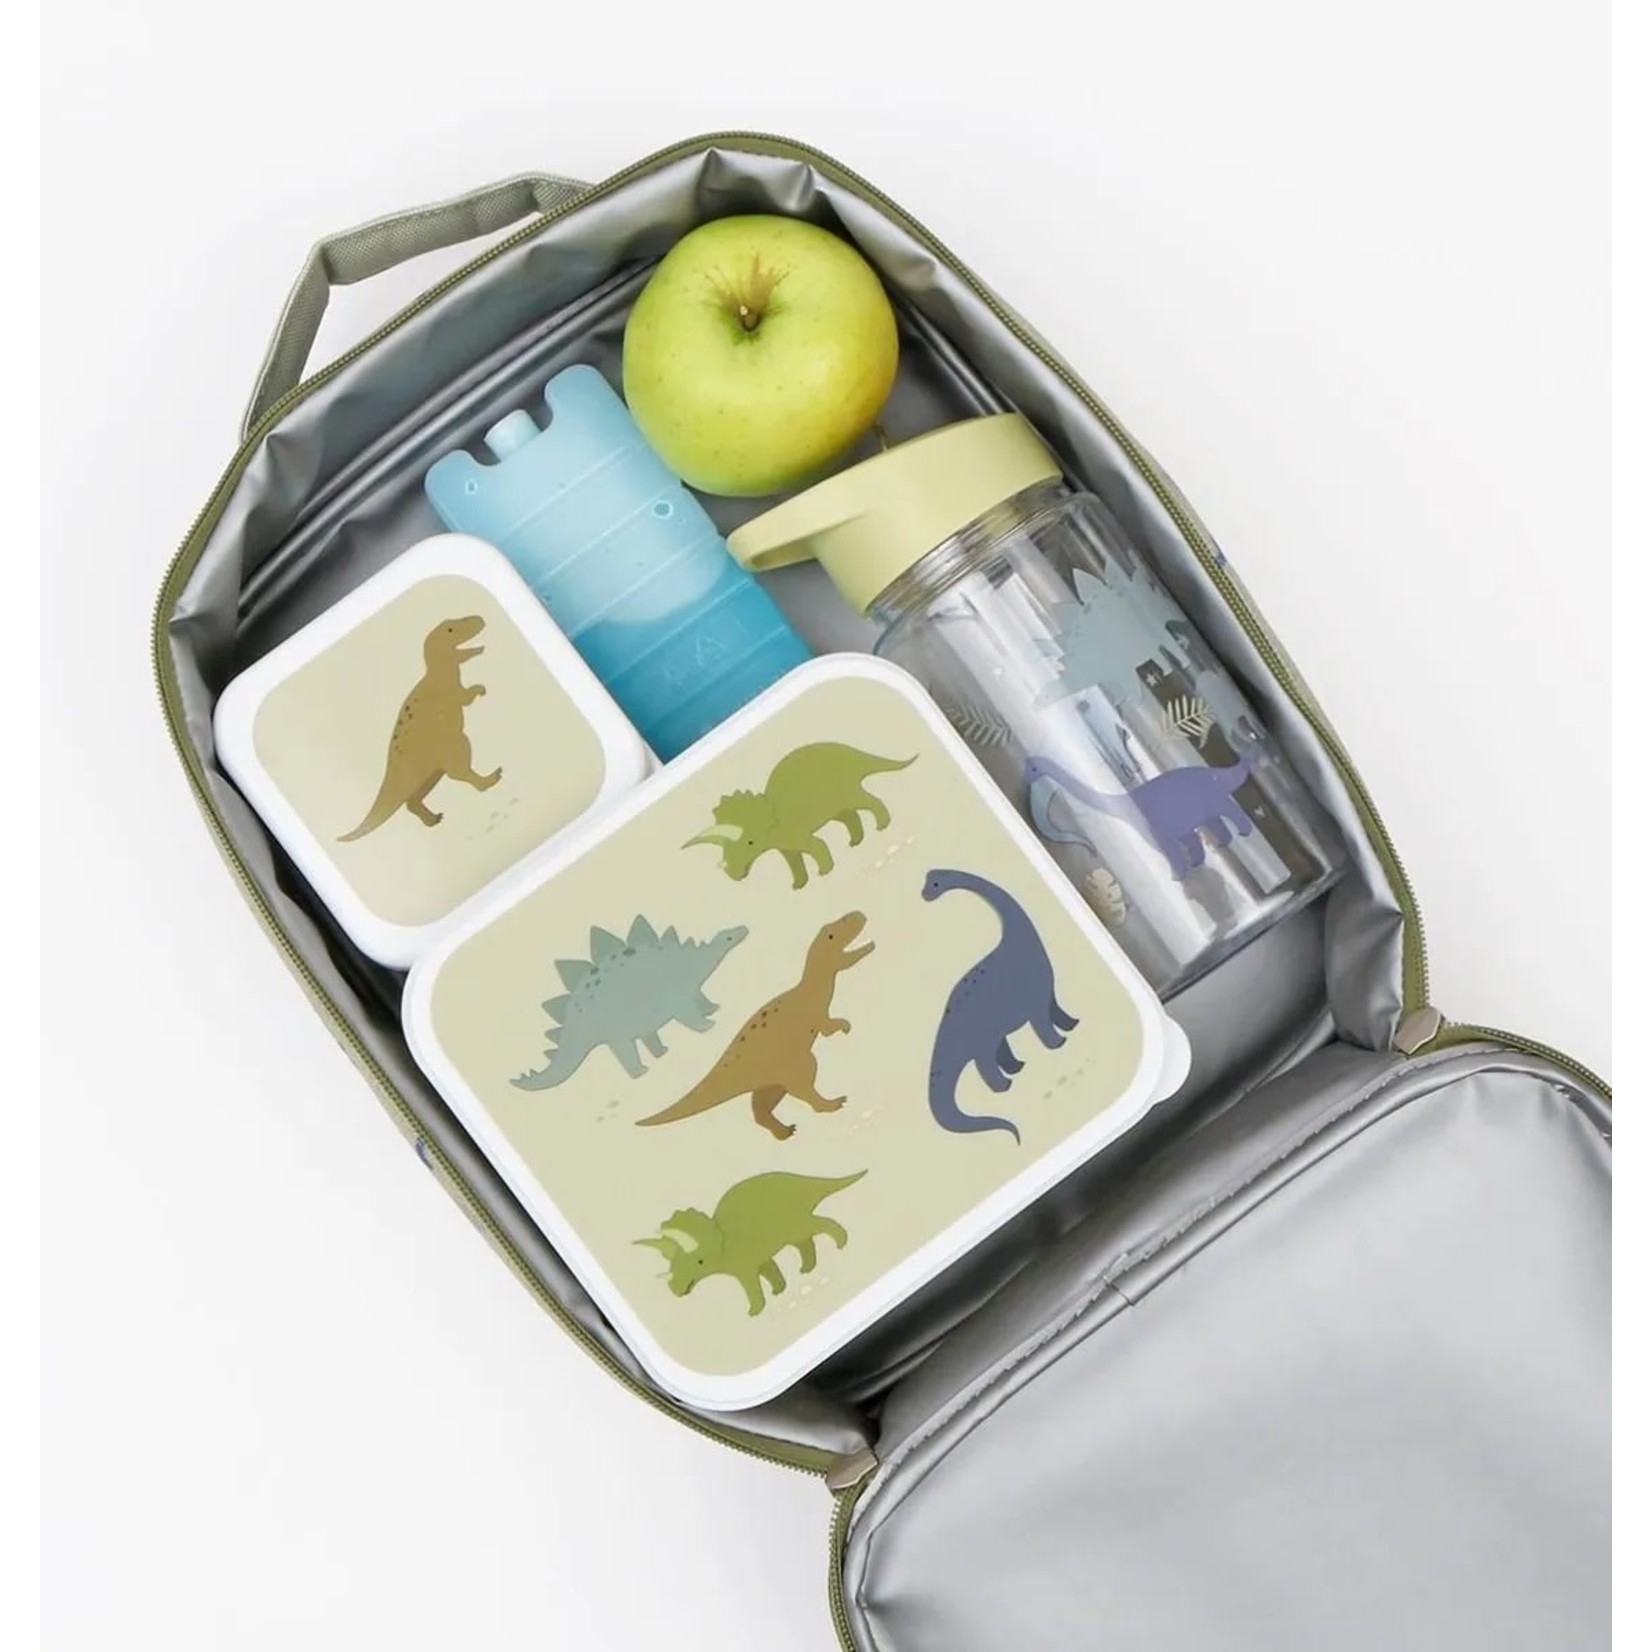 Cool Bag™ Lunch Bag - Monsters - Maxima Gift and Book Center